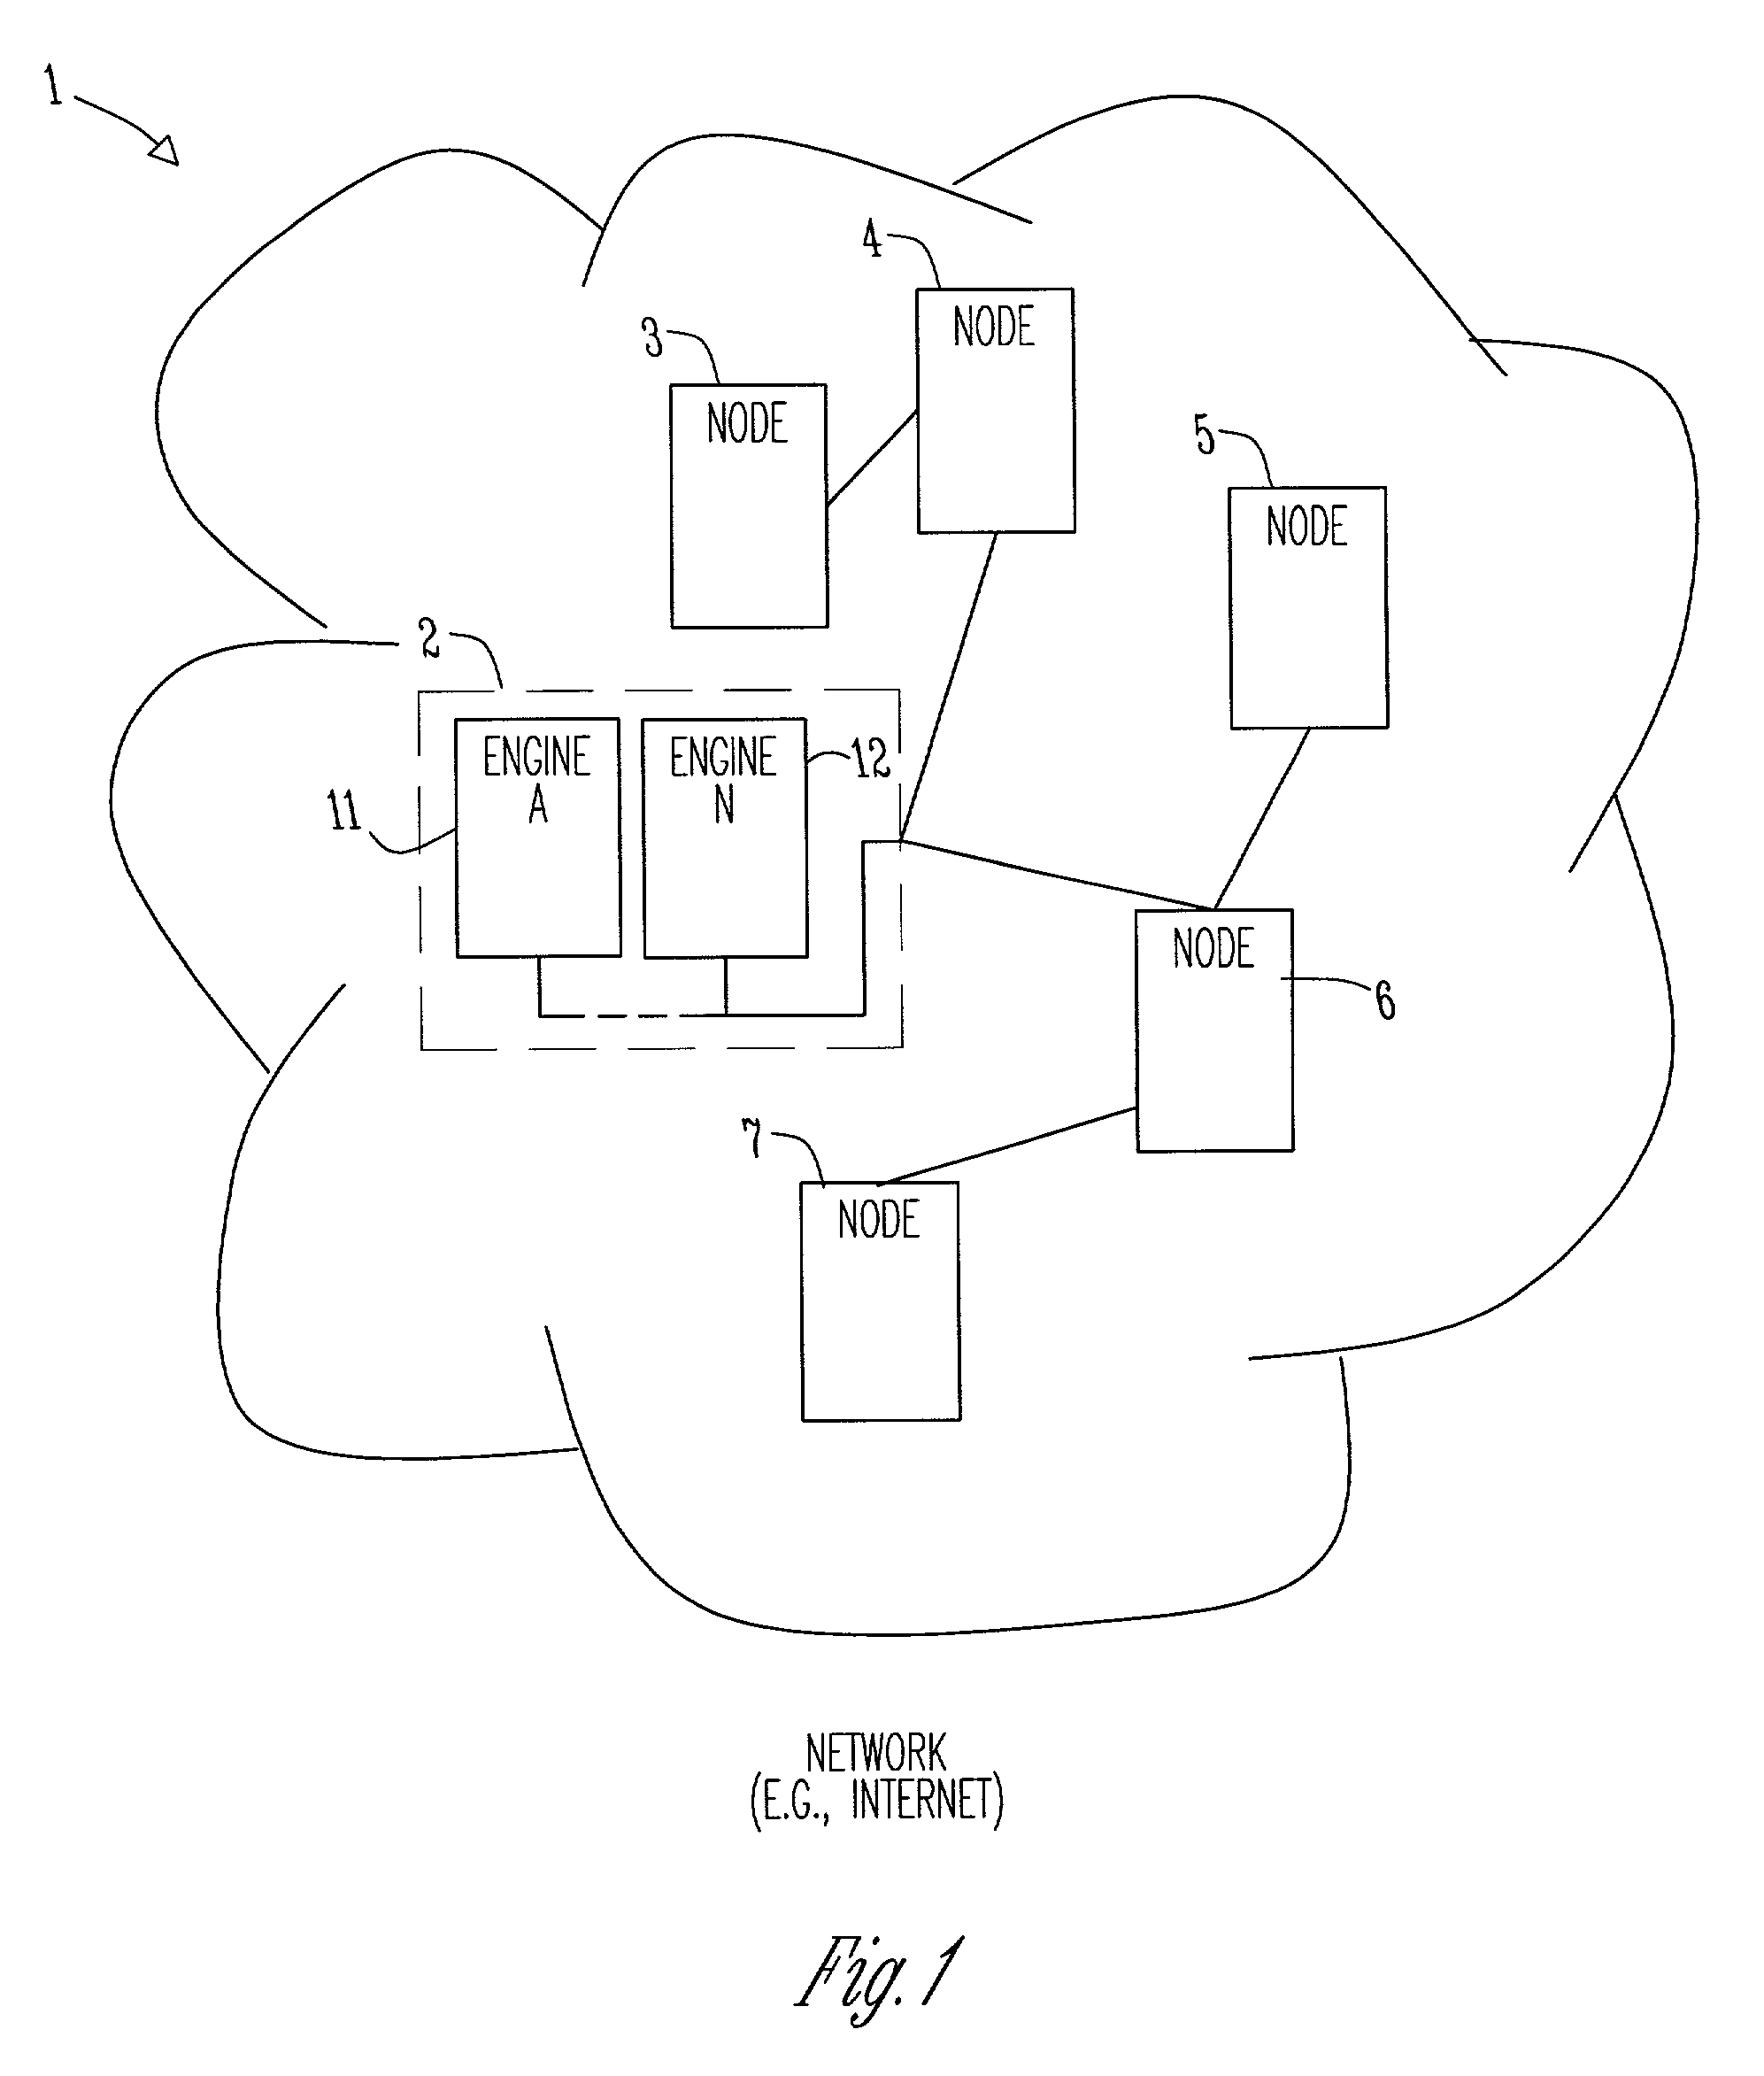 Fault-tolerant system and methods with trusted message acknowledgement